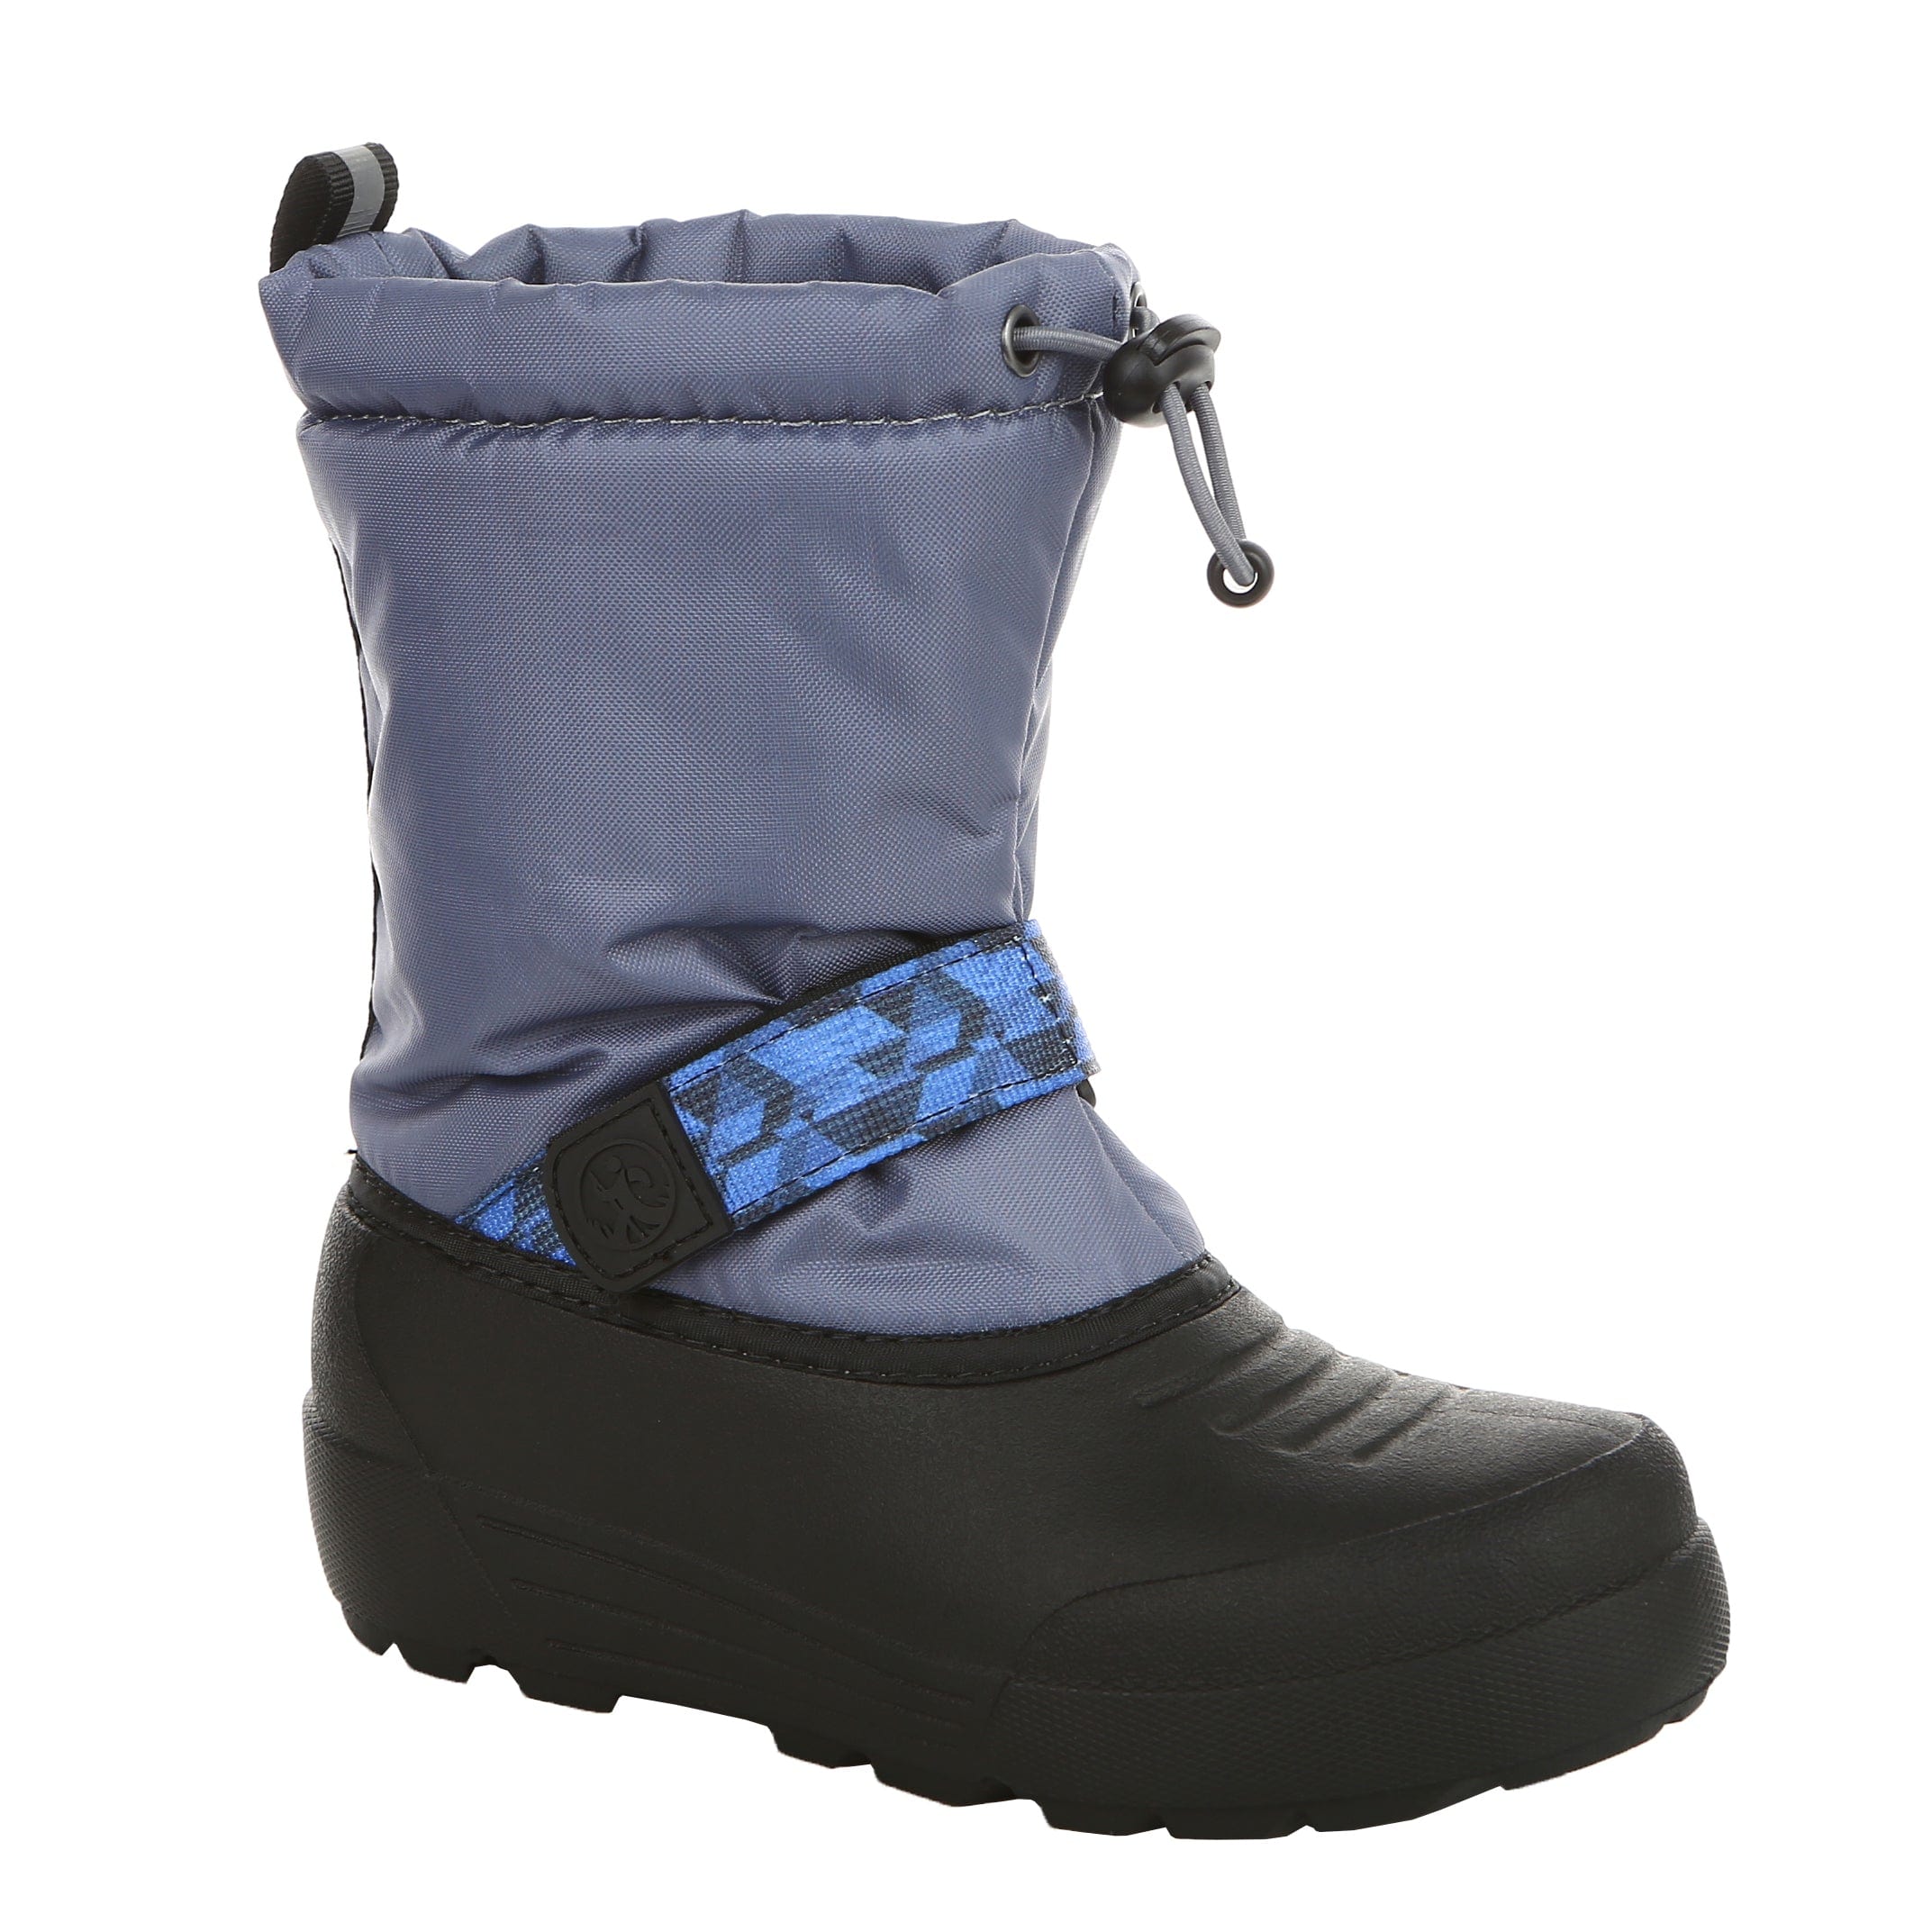 blue and black snow boots for toddlers